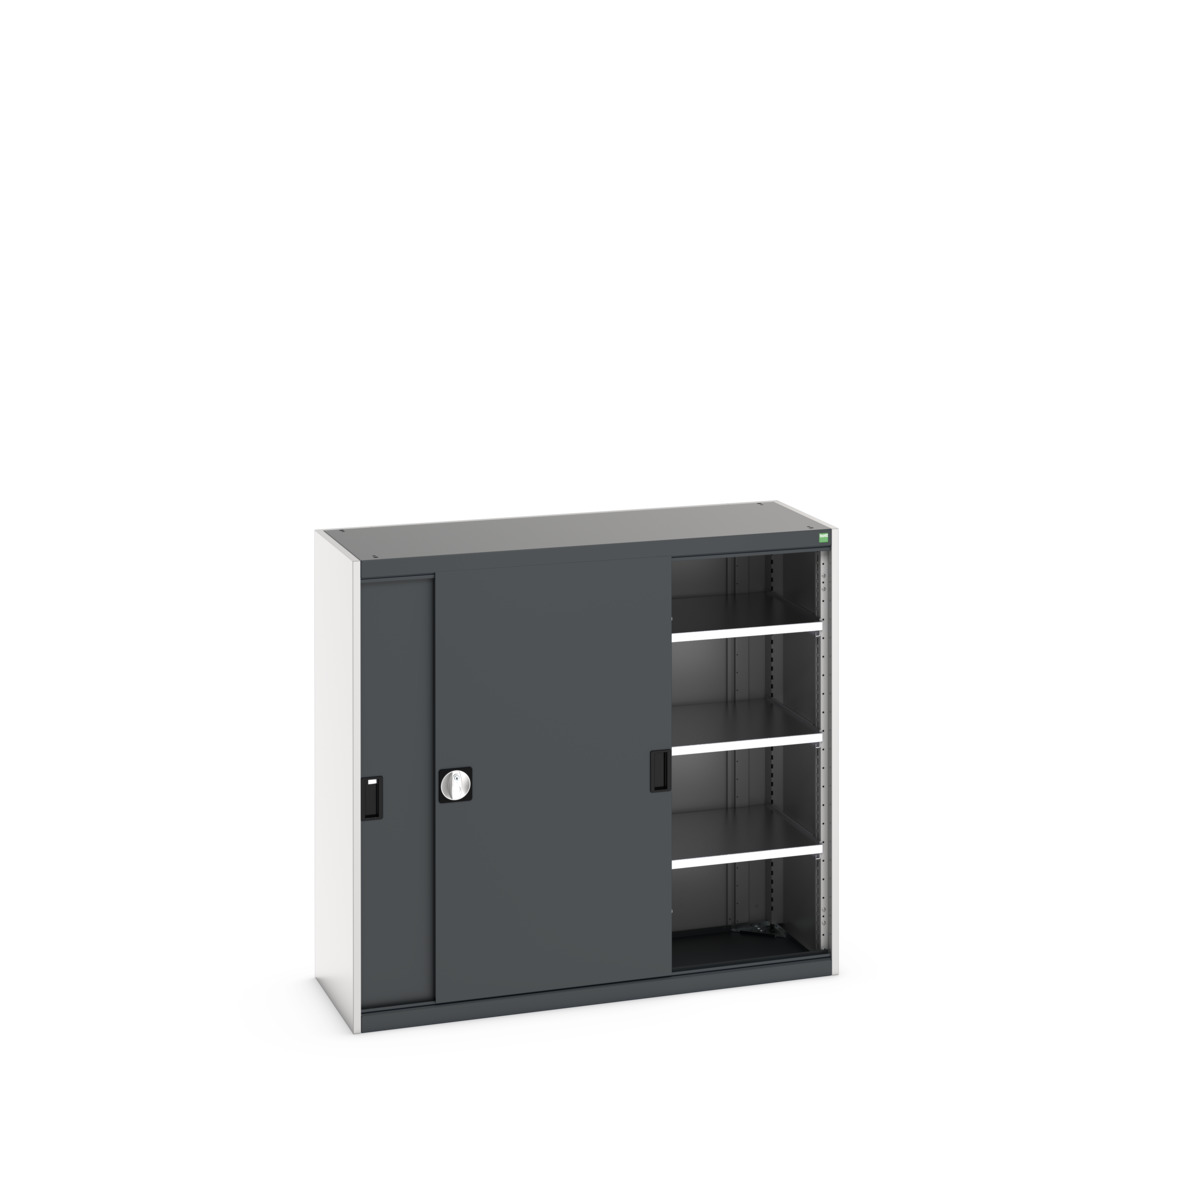 40014061.19V - Armoire Cubio SMS-13512-1.1